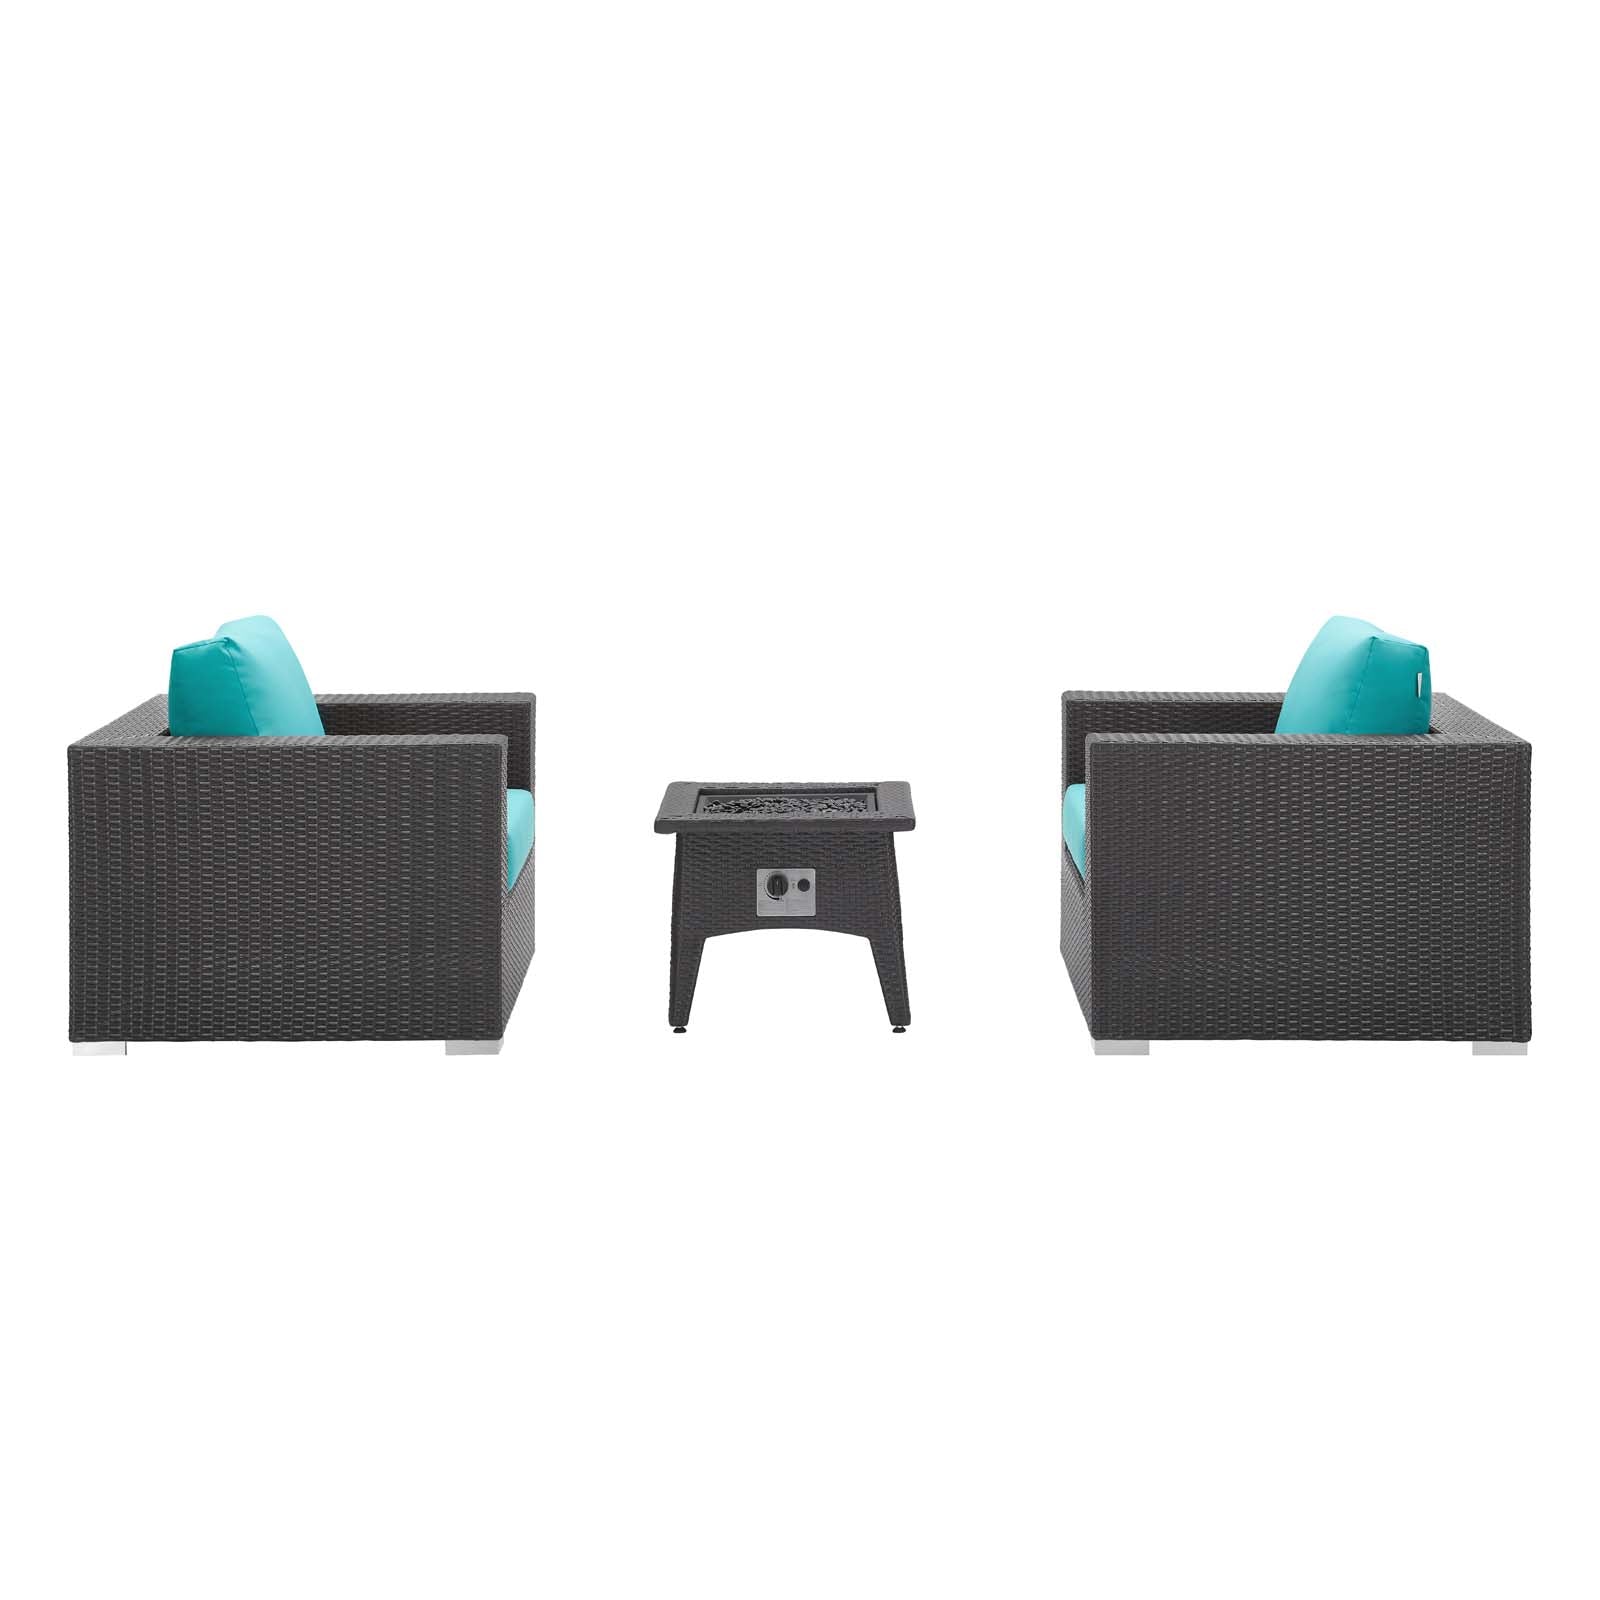 Modway Outdoor Conversation Sets - Convene 3 Piece Set Outdoor Patio with Fire Pit Espresso Turquois